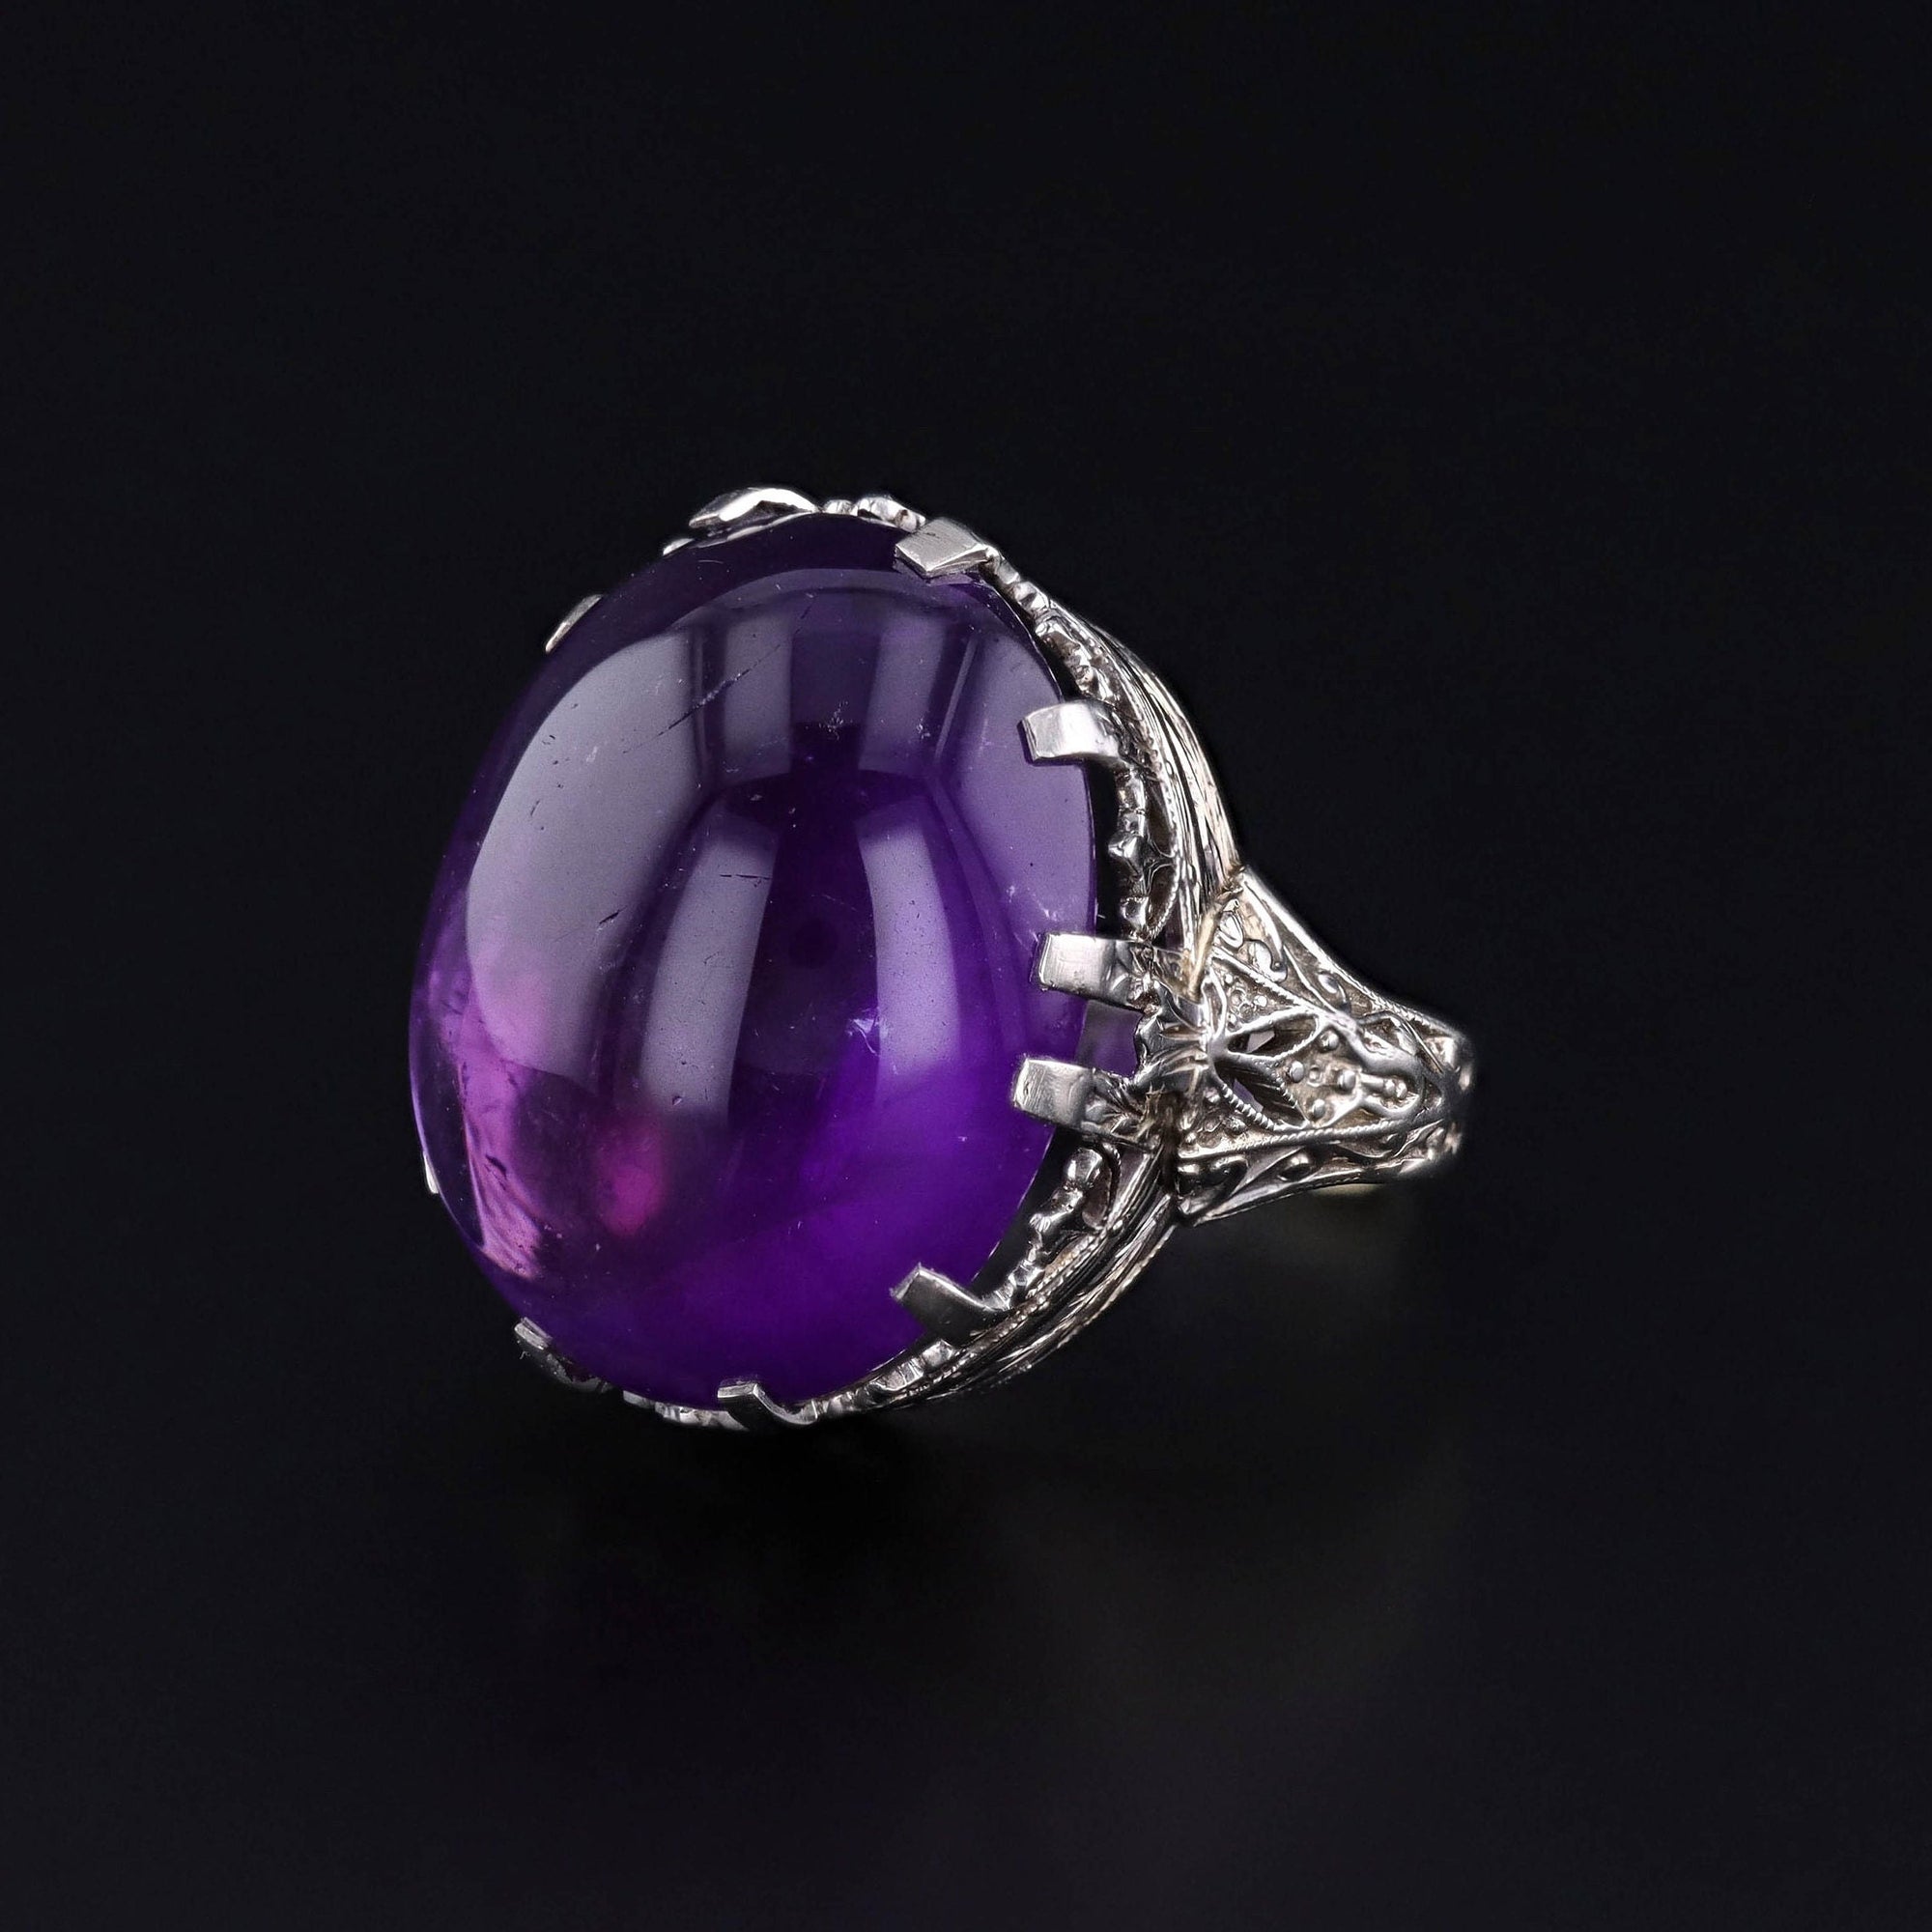 A vintage Art Deco Amethyst statement ring of 18k white gold. The ring dates to the 1920s and packs quite a punch of purple color.